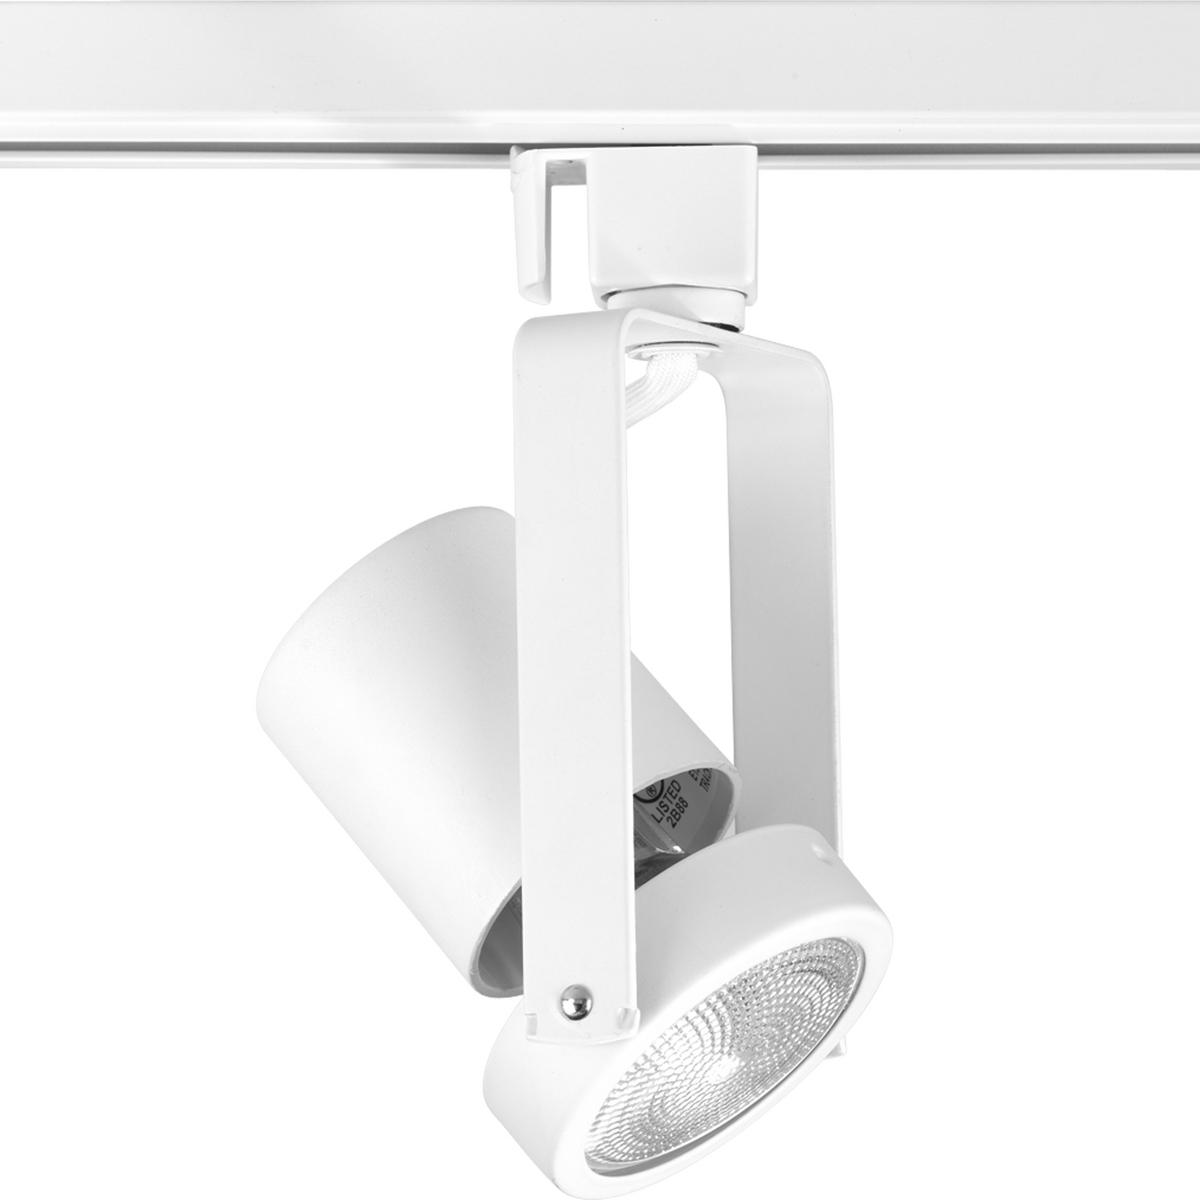 Hubbell P6326-28 White high tech Alpha Trak track head with 360 degree horizontal rotation and 90 degree vertical rotation. Heads can be easily repositioned on the track to provide lighting in different areas of the room. Excellent for both residential and retail location